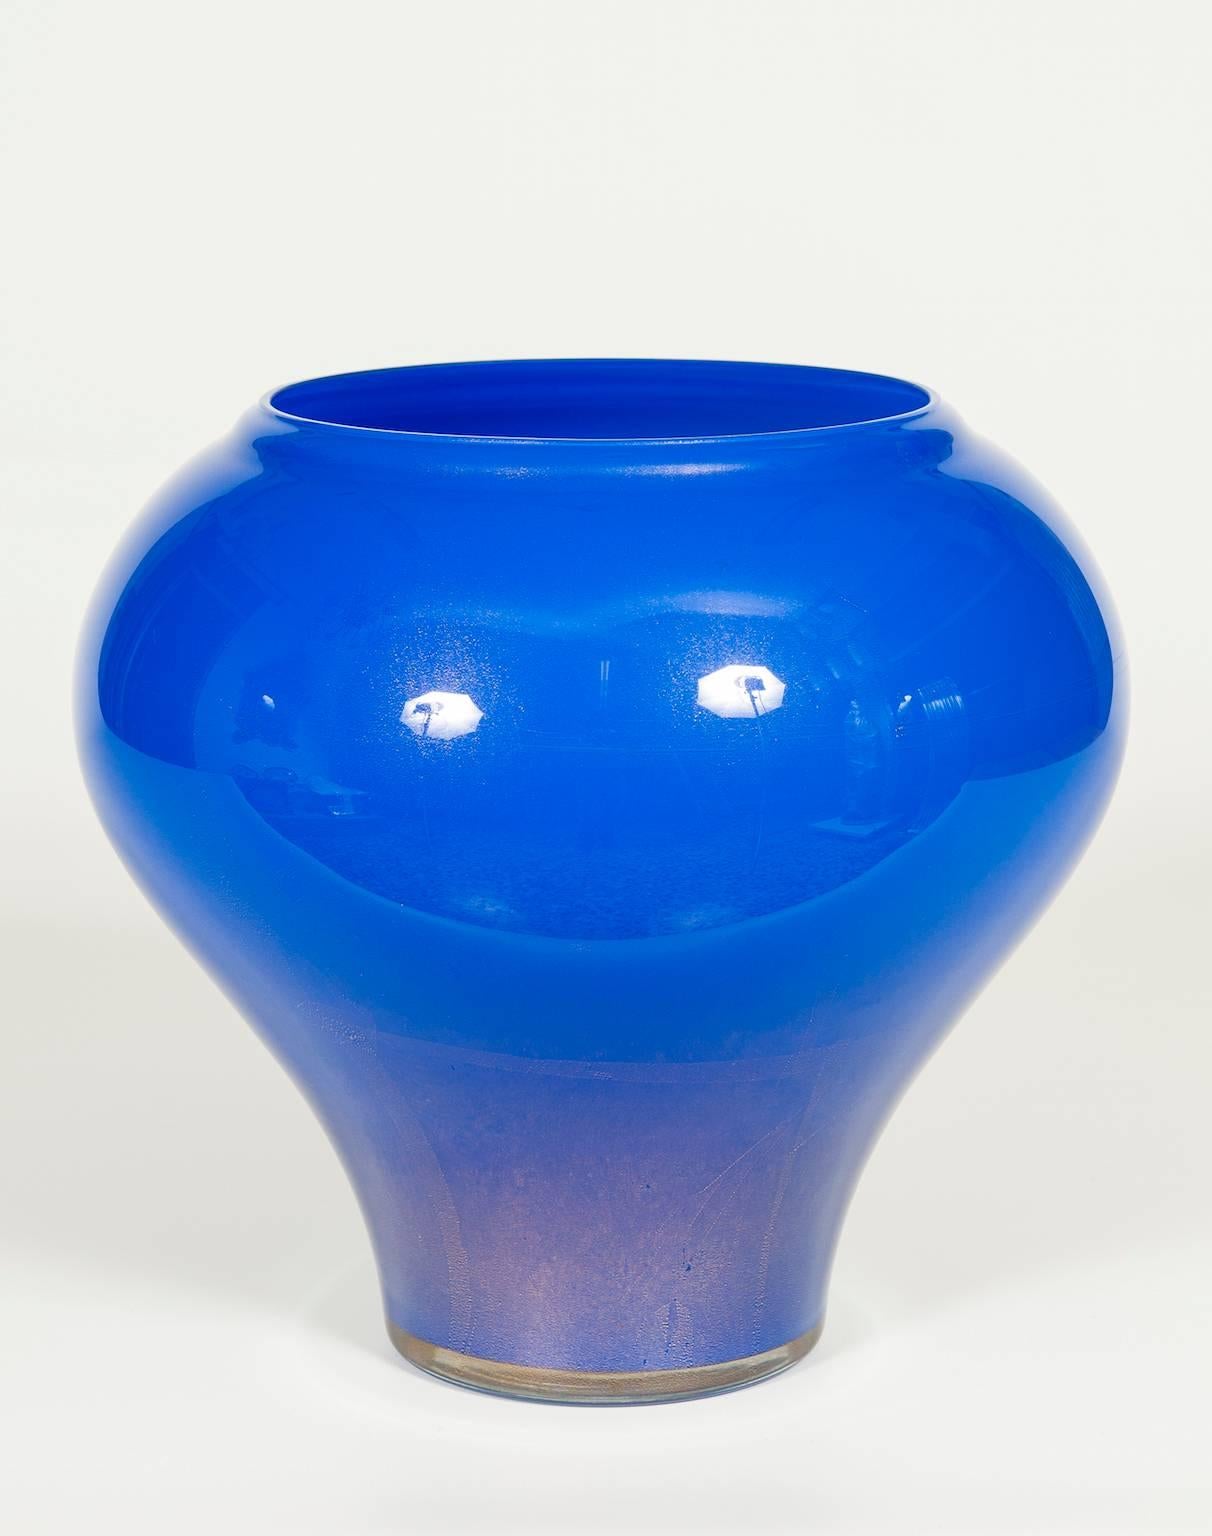 Blue vase in blown Murano glass with 24kt gold 1980s, Italy.
This Italian Murano glass vase in blue color and gold finishes is a refined work of art that was entirely handcrafted during the 1980s, using the ancient glassmaking arts and techniques